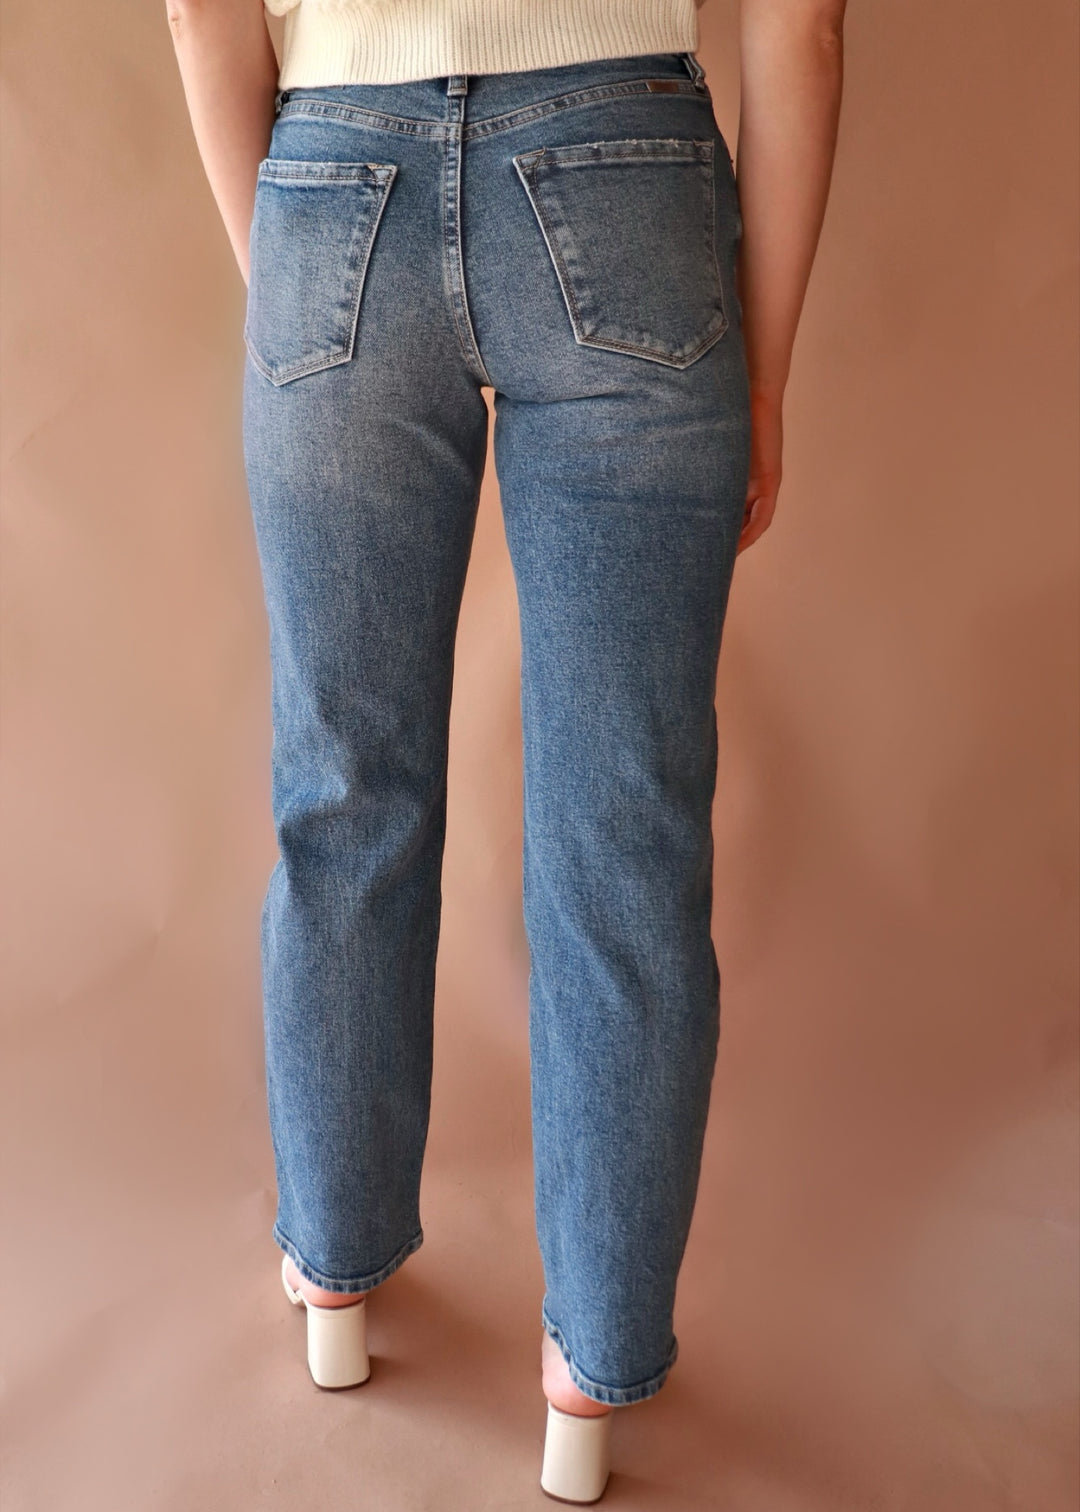 CLEARANCE FINAL SALE Jude Medium Wash Relaxed Fit Denim - Kan Can